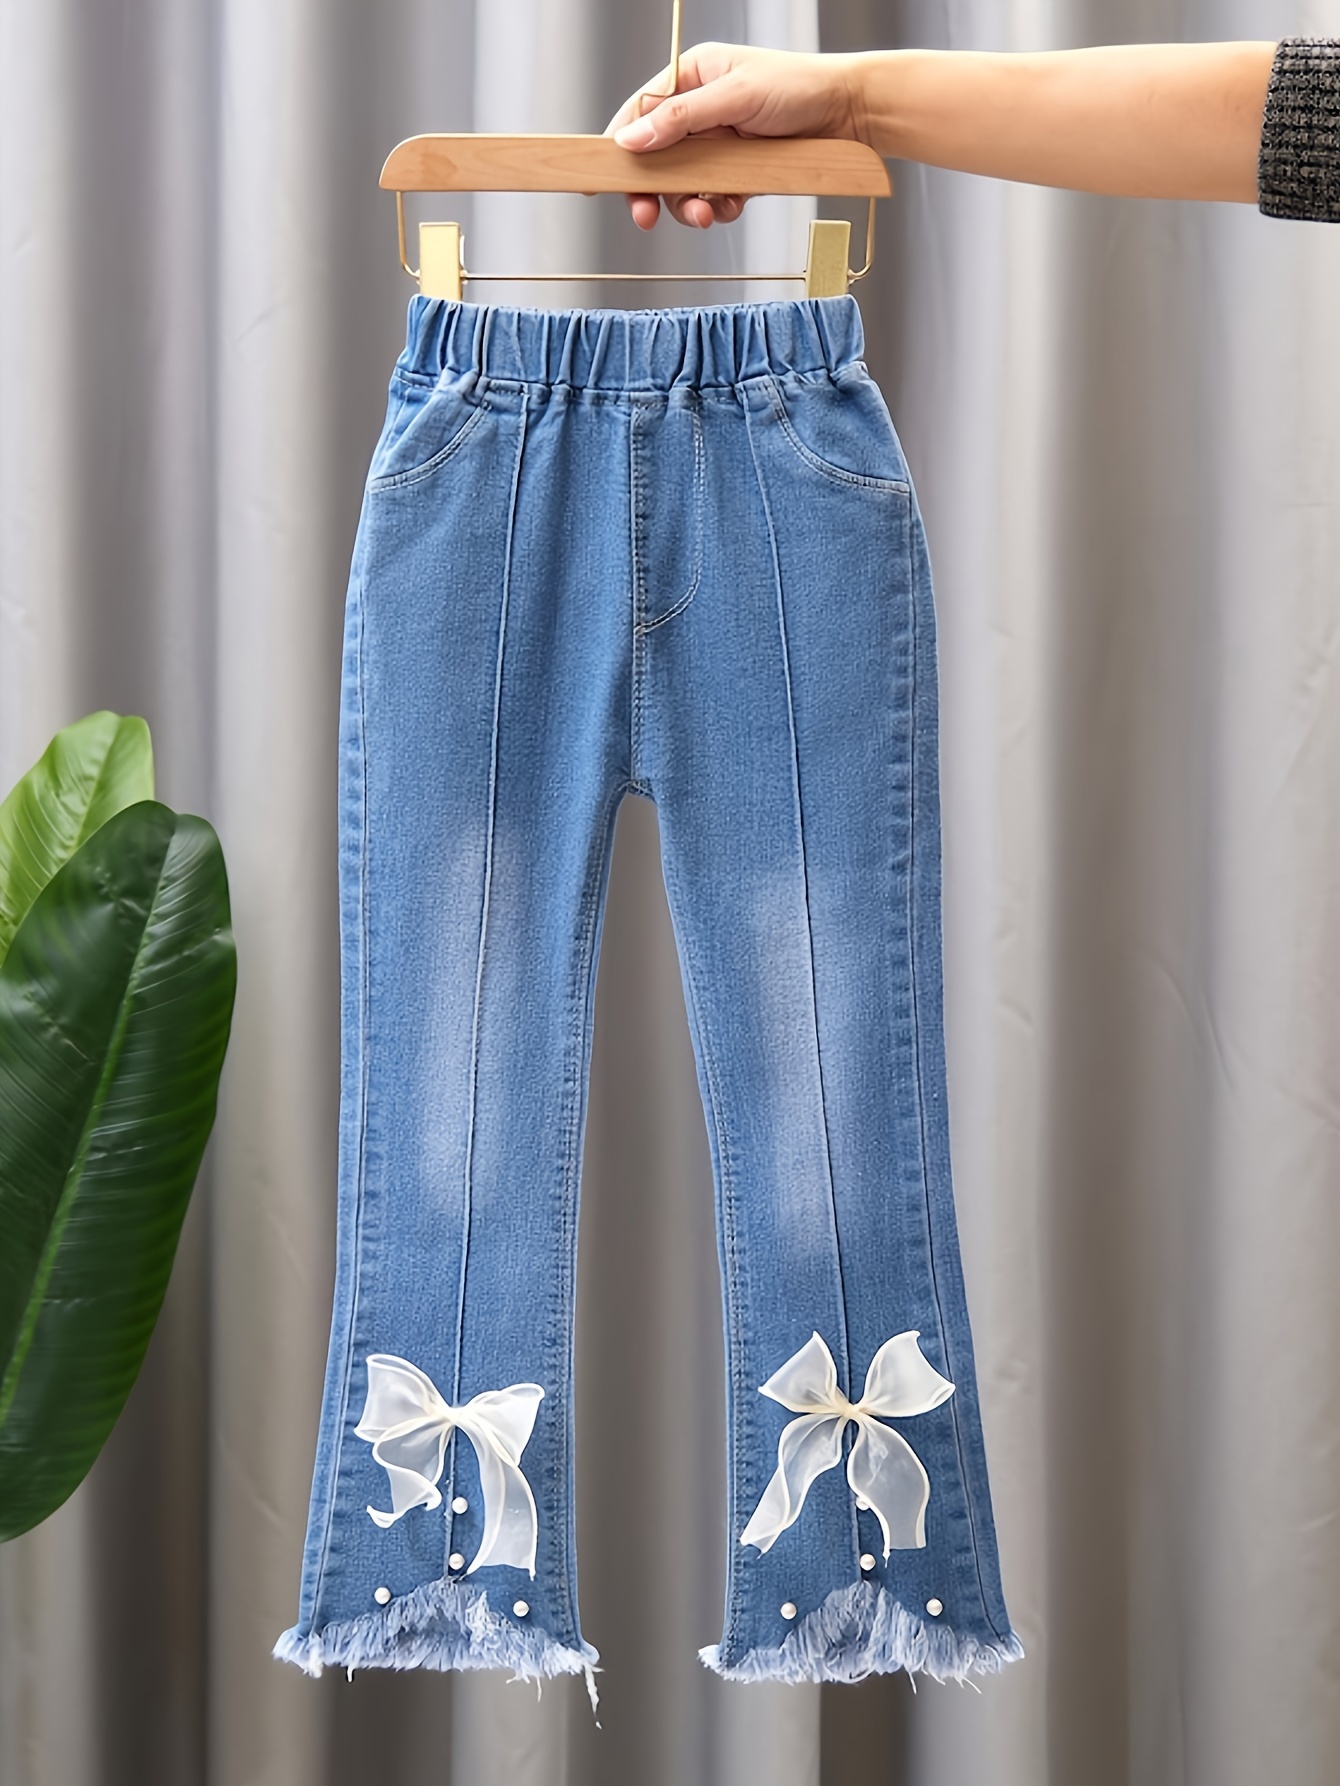 Cute Bootcut Jeans for Girls